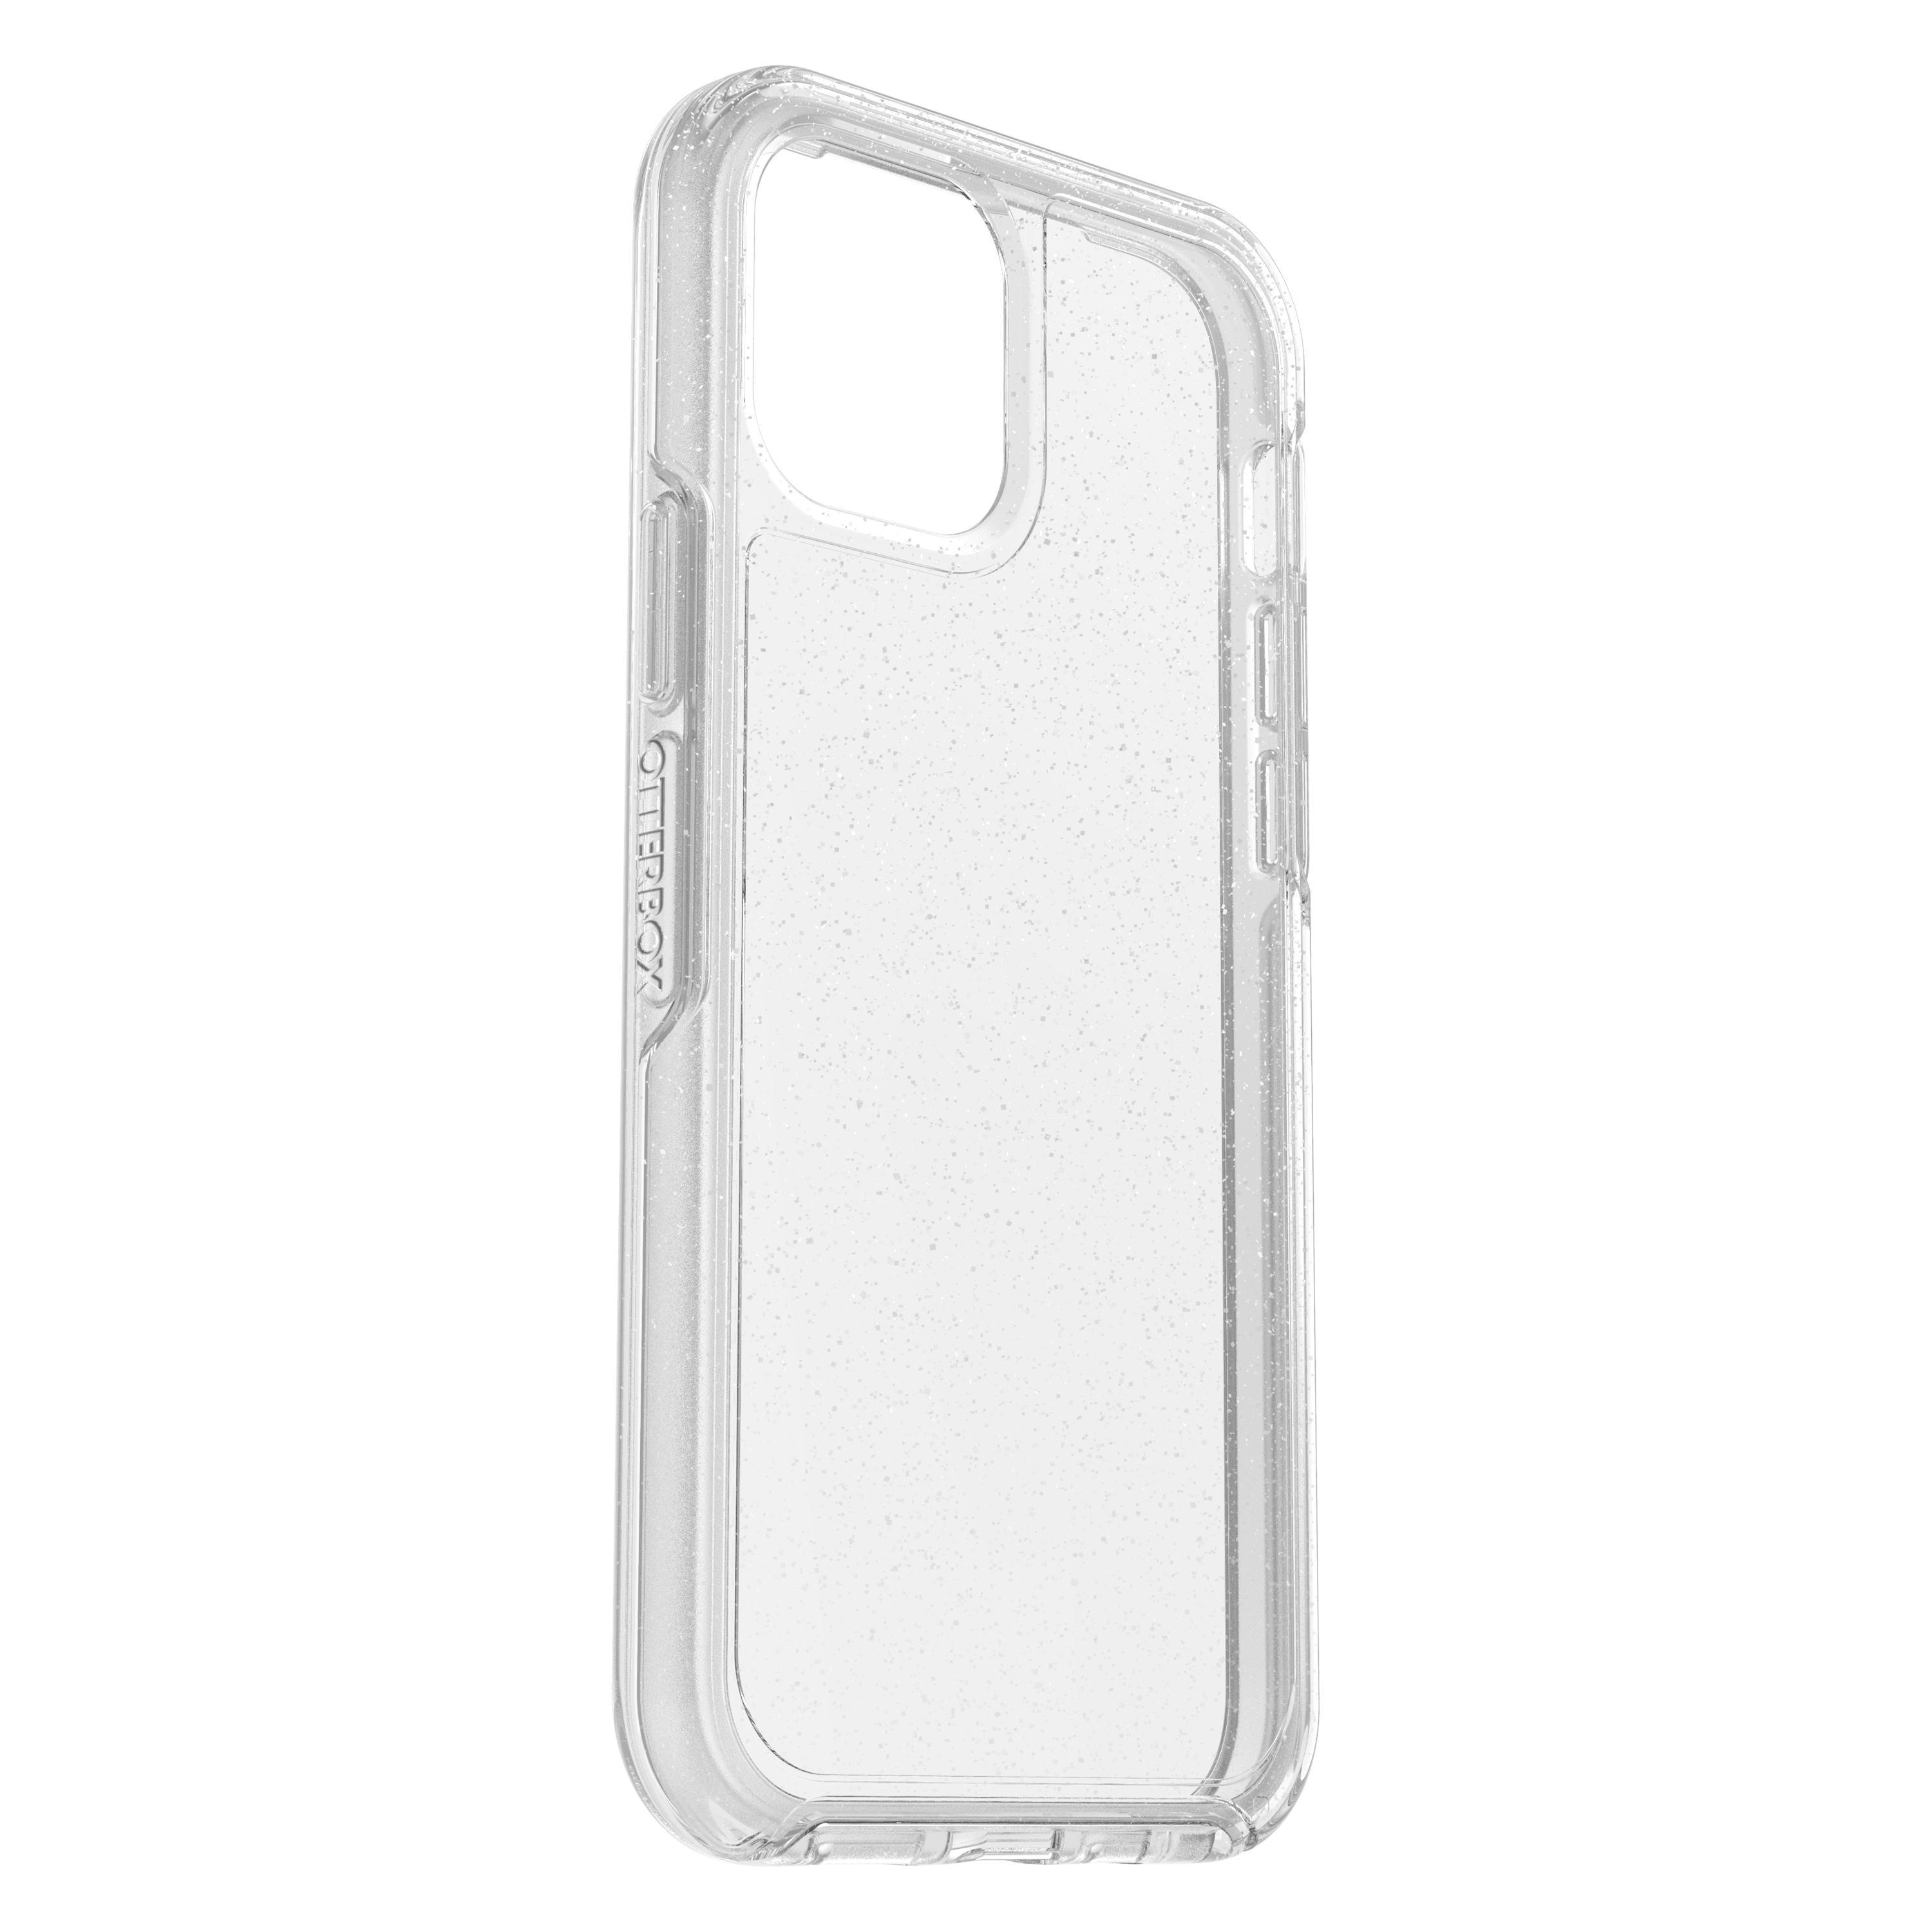 , Pro, iPhone Apple, Symmetry Clear 12, Backcover, iPhone OTTERBOX 12 Transparent/Glitzer